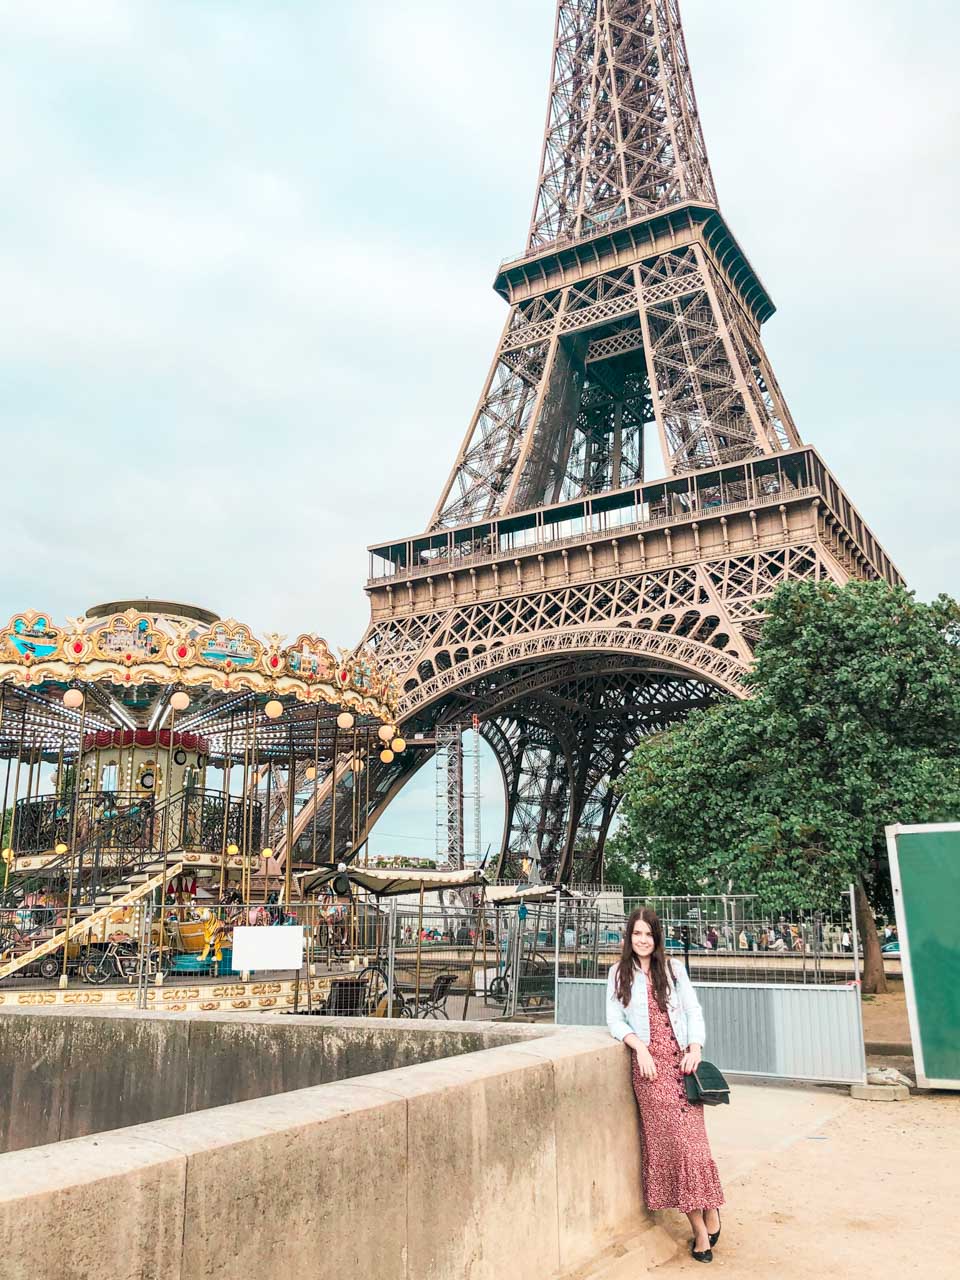 Woman in a white and red dress leaning against the ledge next to the Carousel of the Eiffel Tower